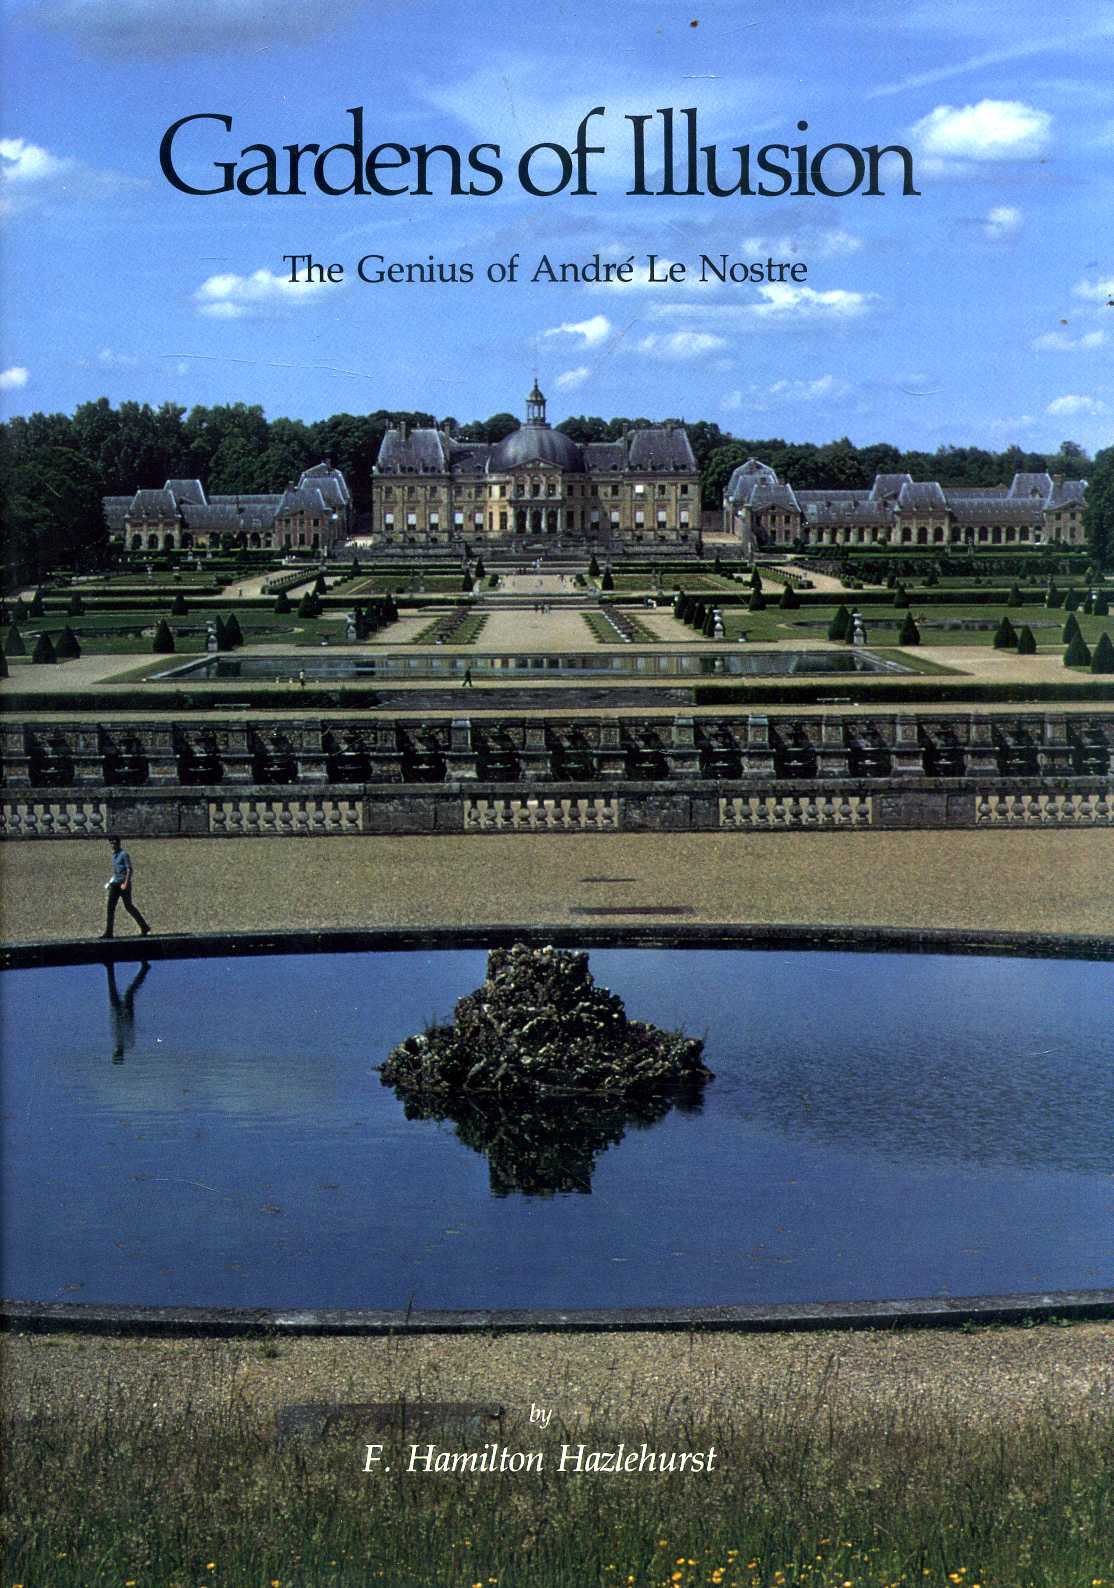 Gardens of Illusion: The Genius of AndrñE Le Nostre: Genius of Andre Le Nostre